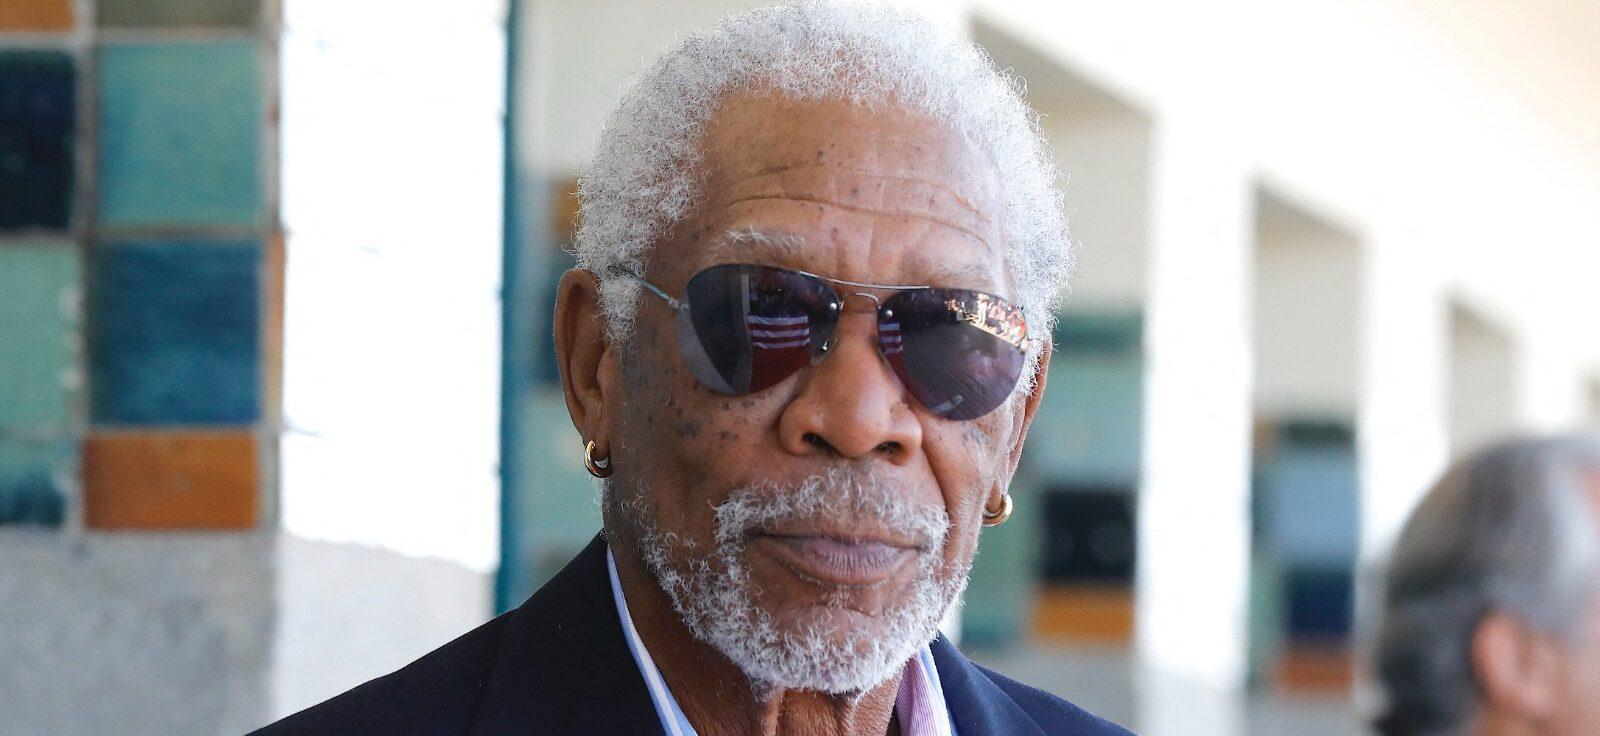 Friends Of Morgan Freeman Allegedly Worried About His Weight Loss, Claim Health Status Is At ‘Crisis Point’